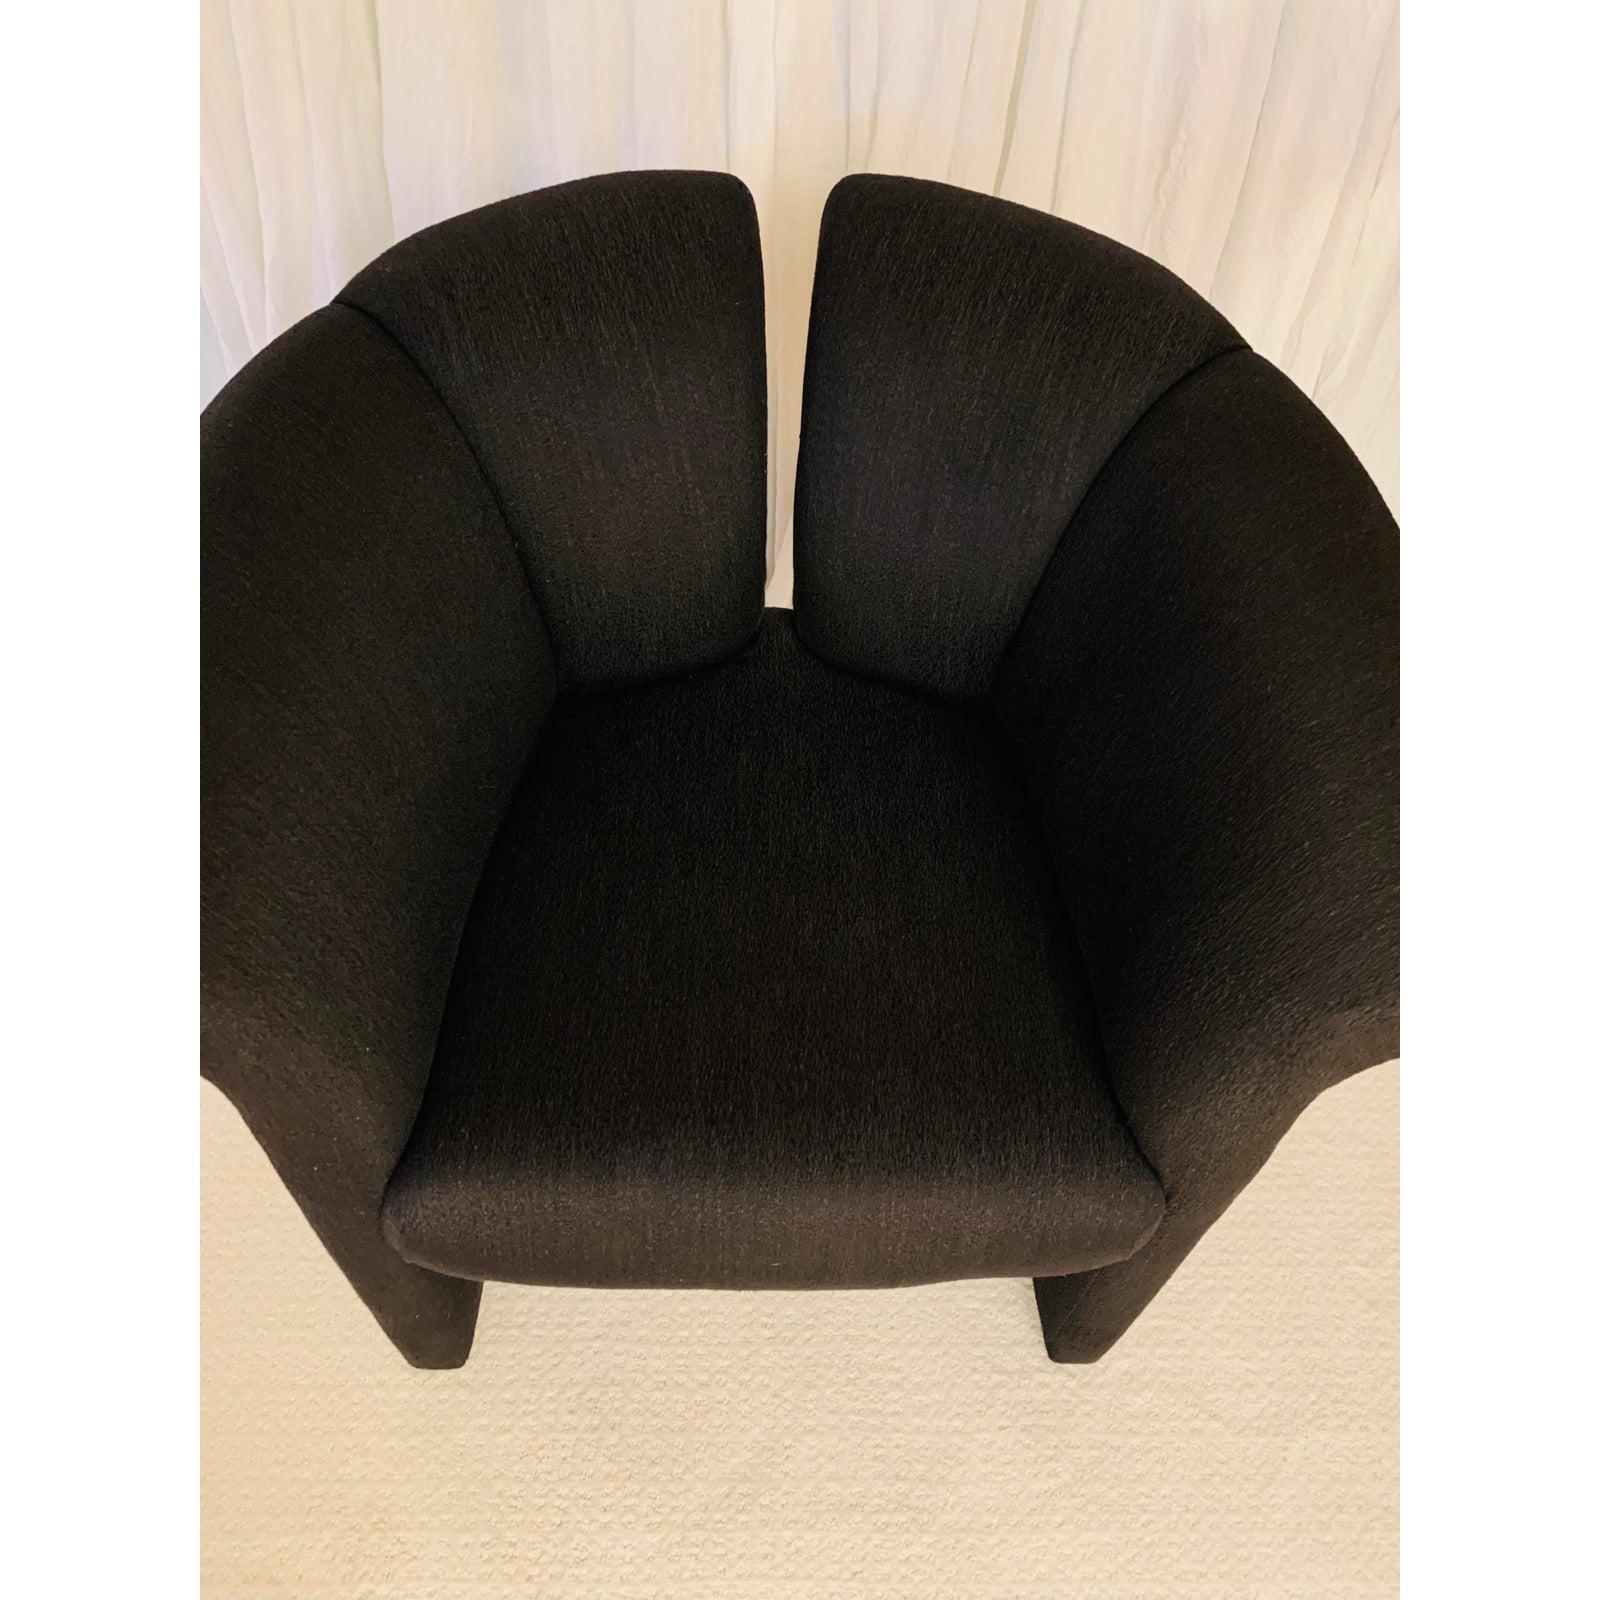 This curvaceous chair is in truly perfect condition.
The black upholstery is rich, not faded at all.
While the silhouette is a bit more formal than your every-day boxy club, it remains quite comfortable.